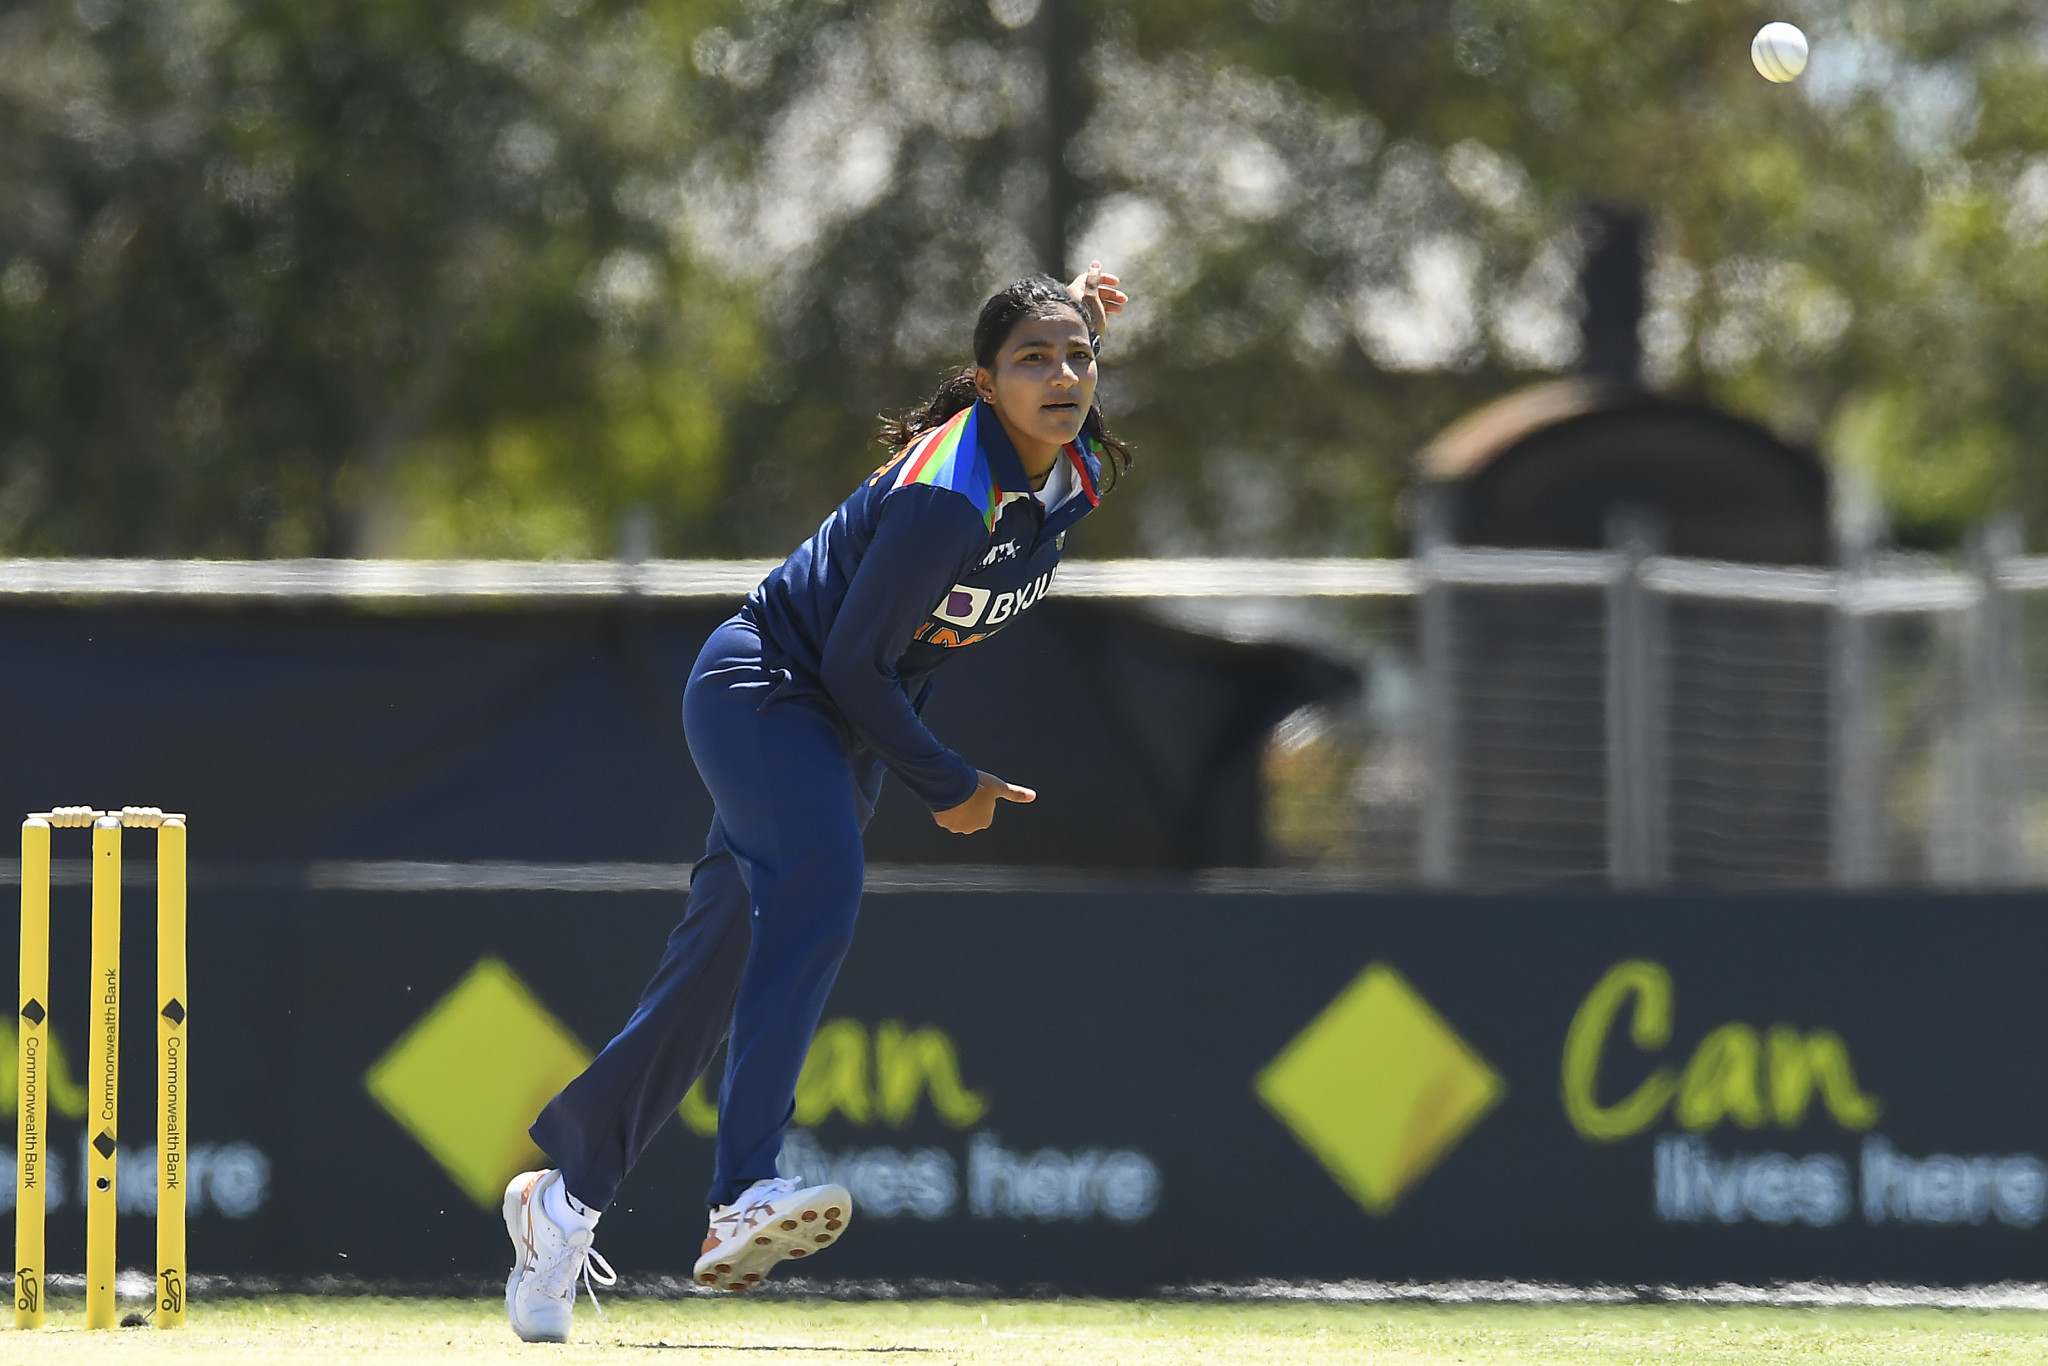 India thrash arch-rivals Pakistan to begin Women’s Cricket World Cup campaign